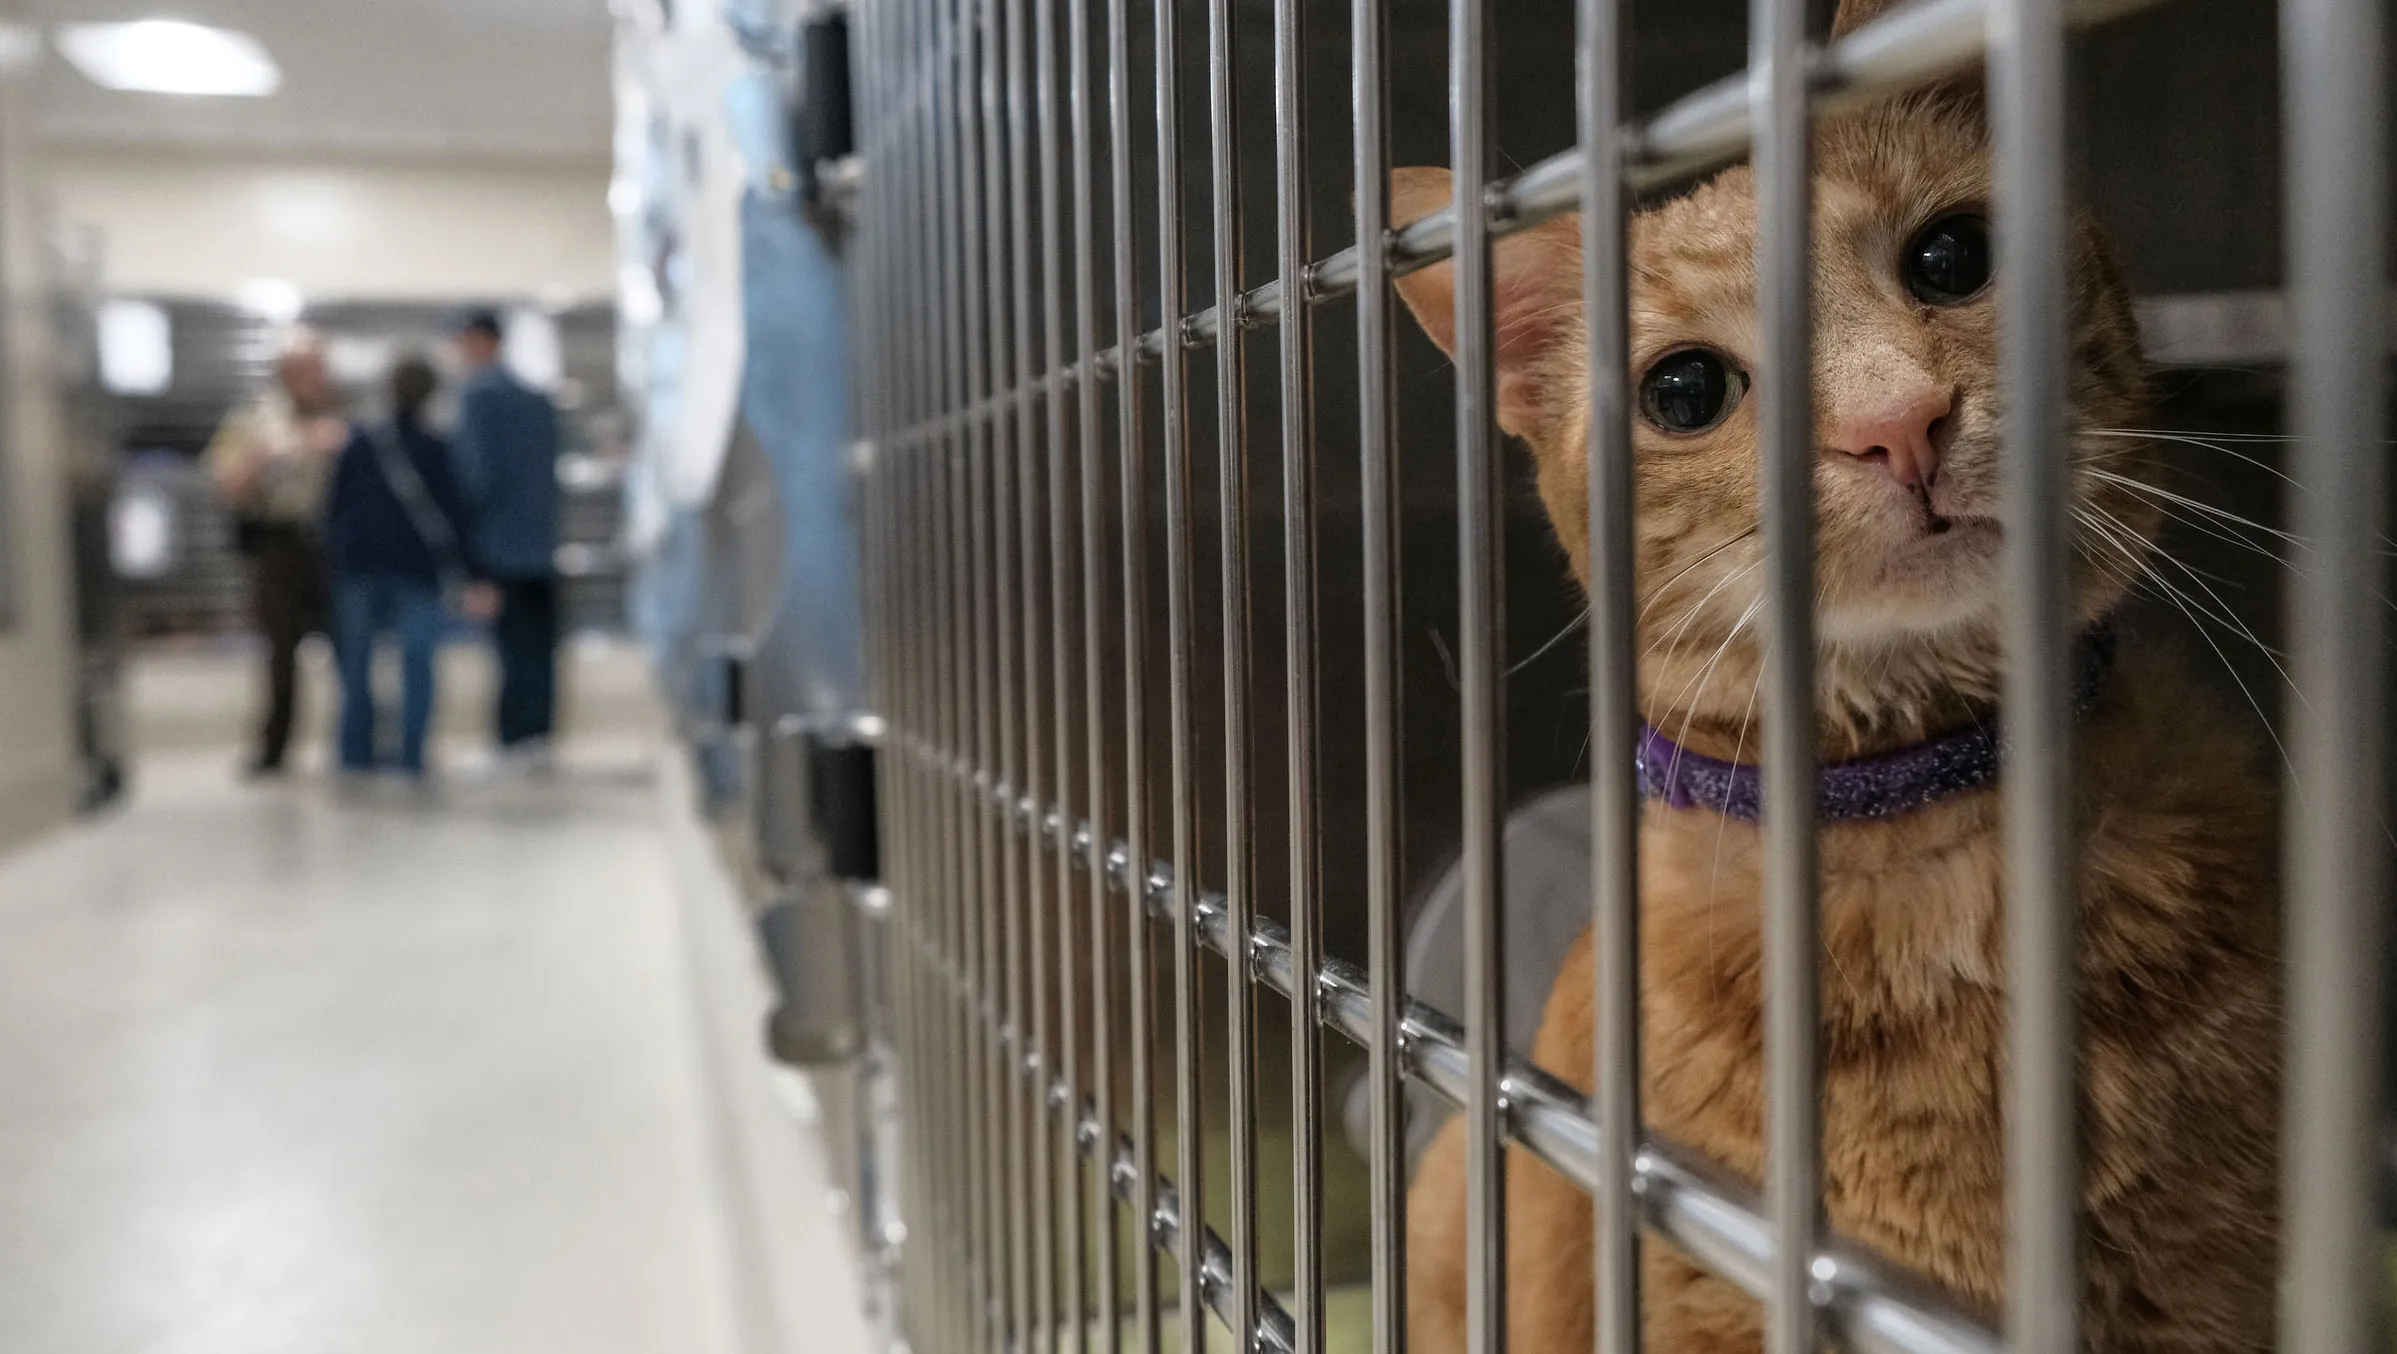 How many kill shelters are in Michigan?